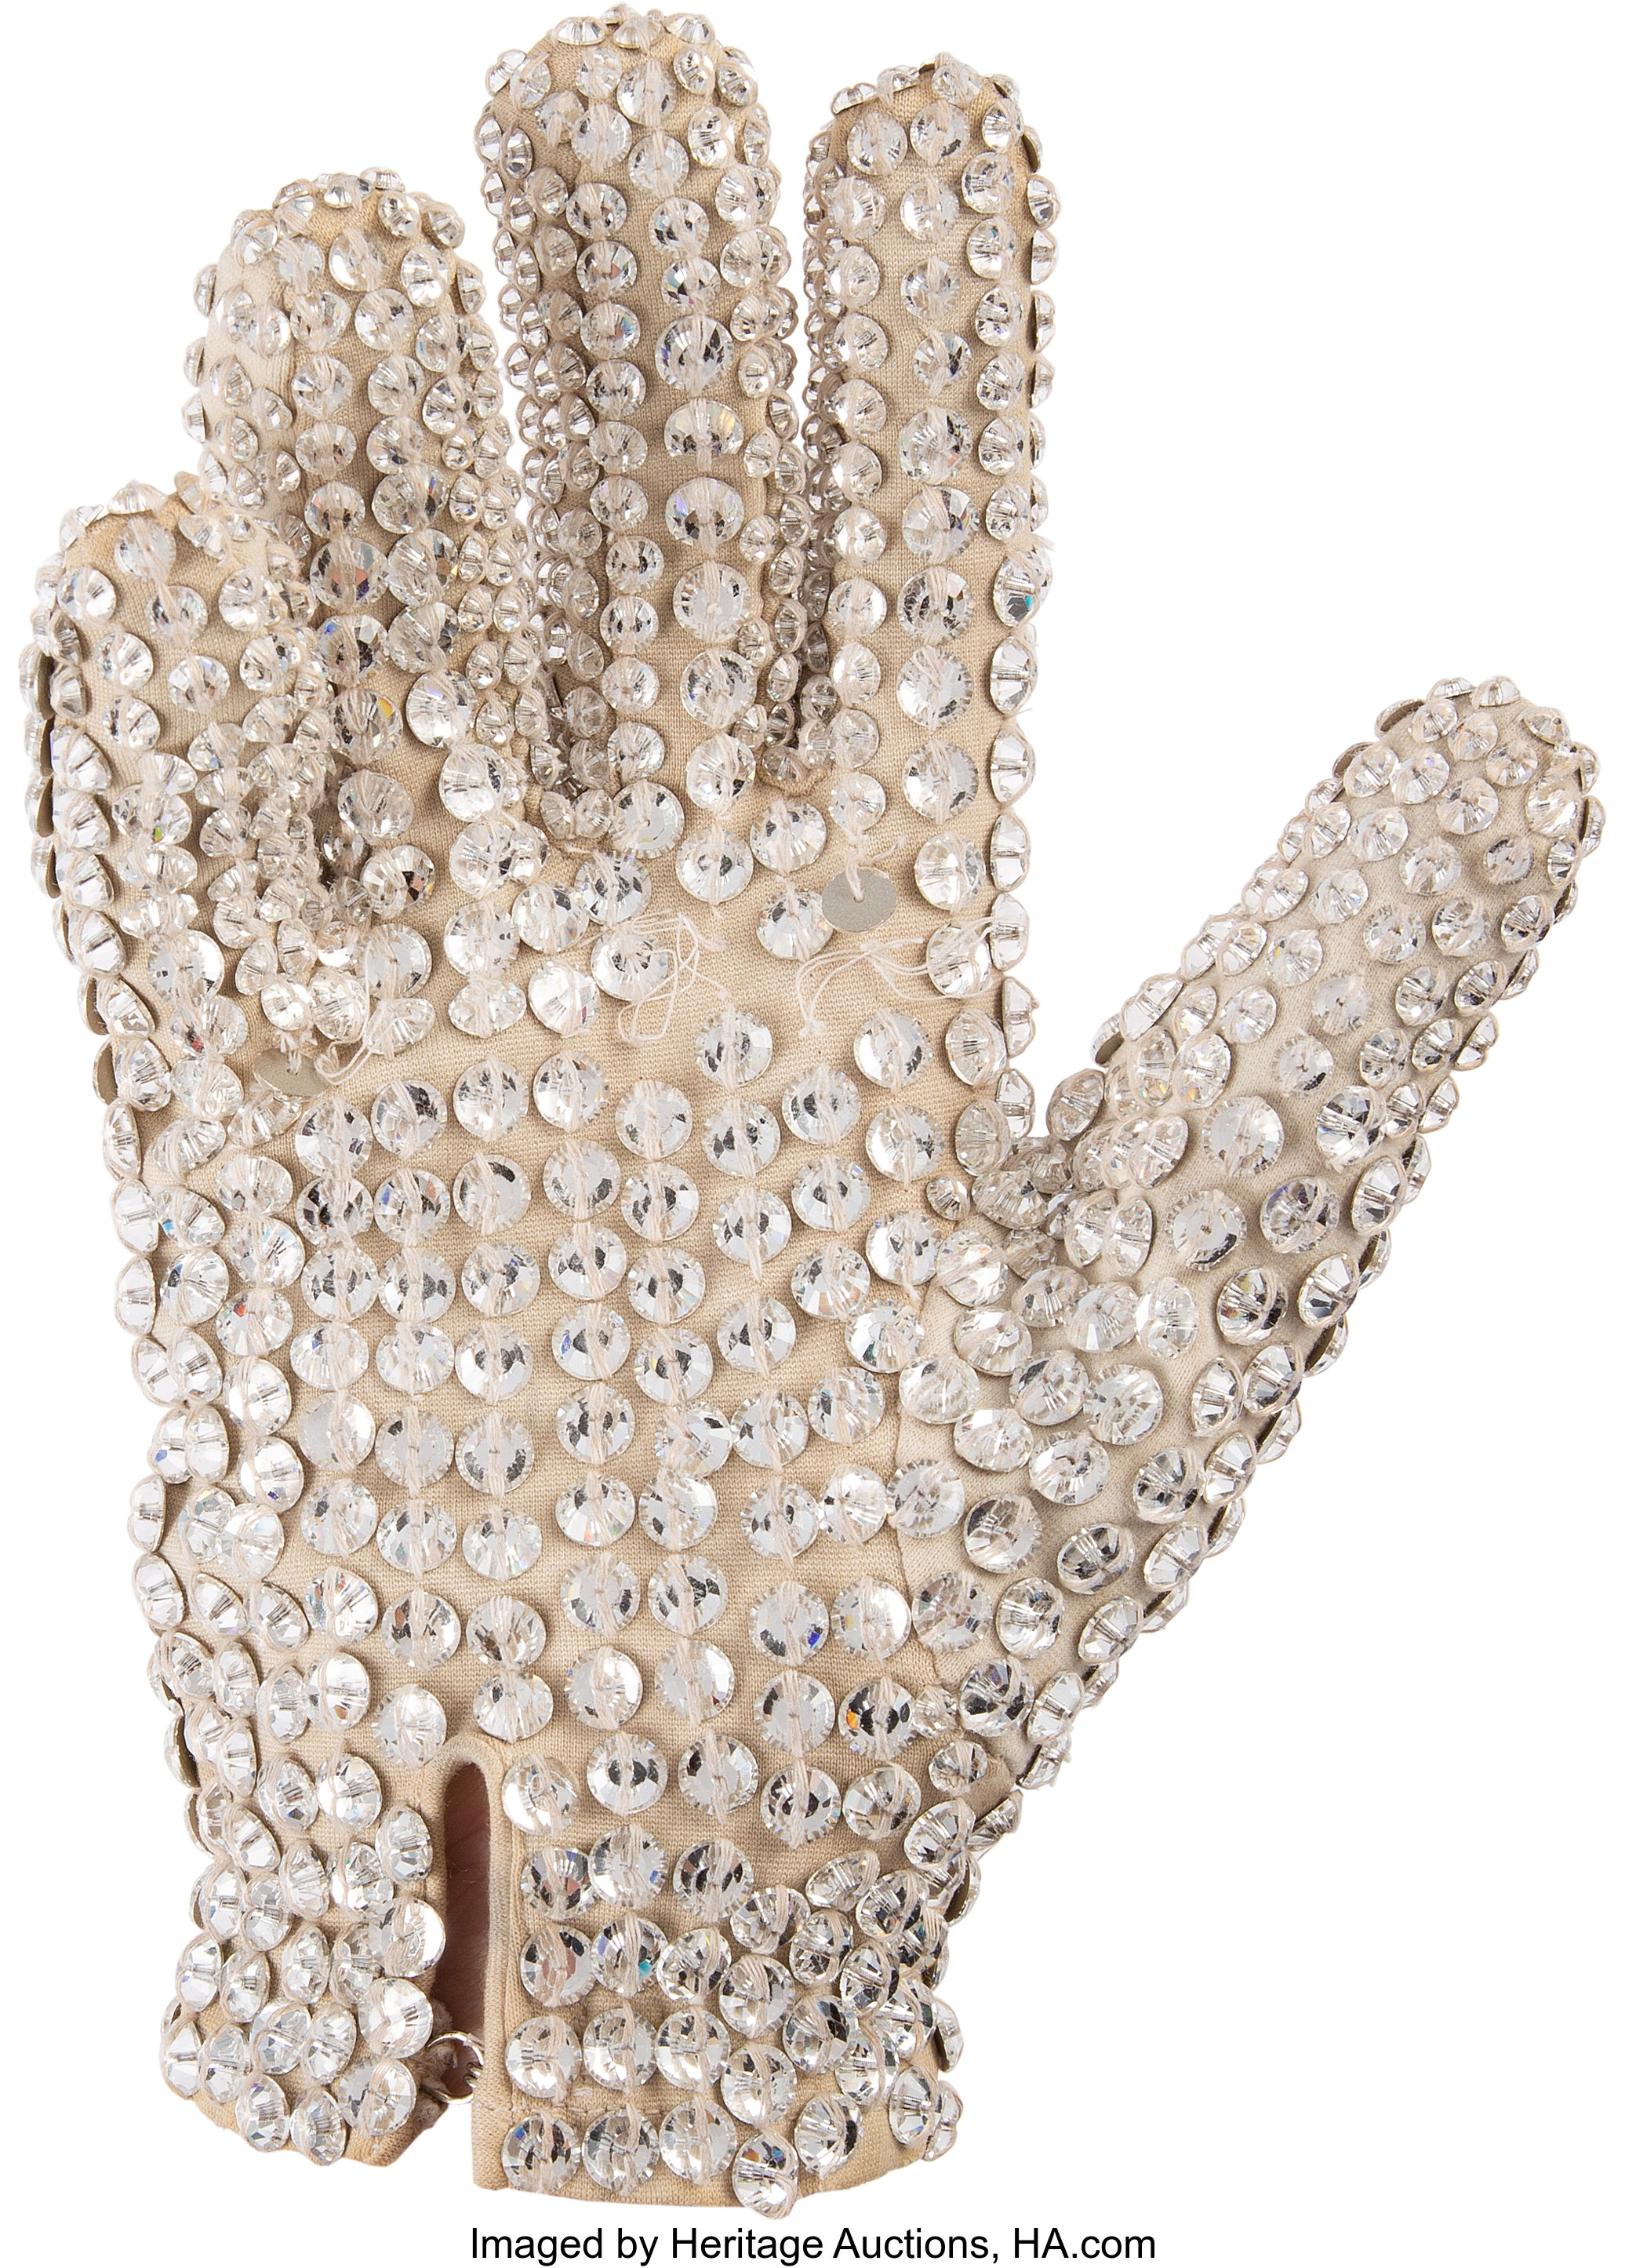 Michael Jackson Personally Owned Crystal-Studded Glove Worn on, Lot #89245